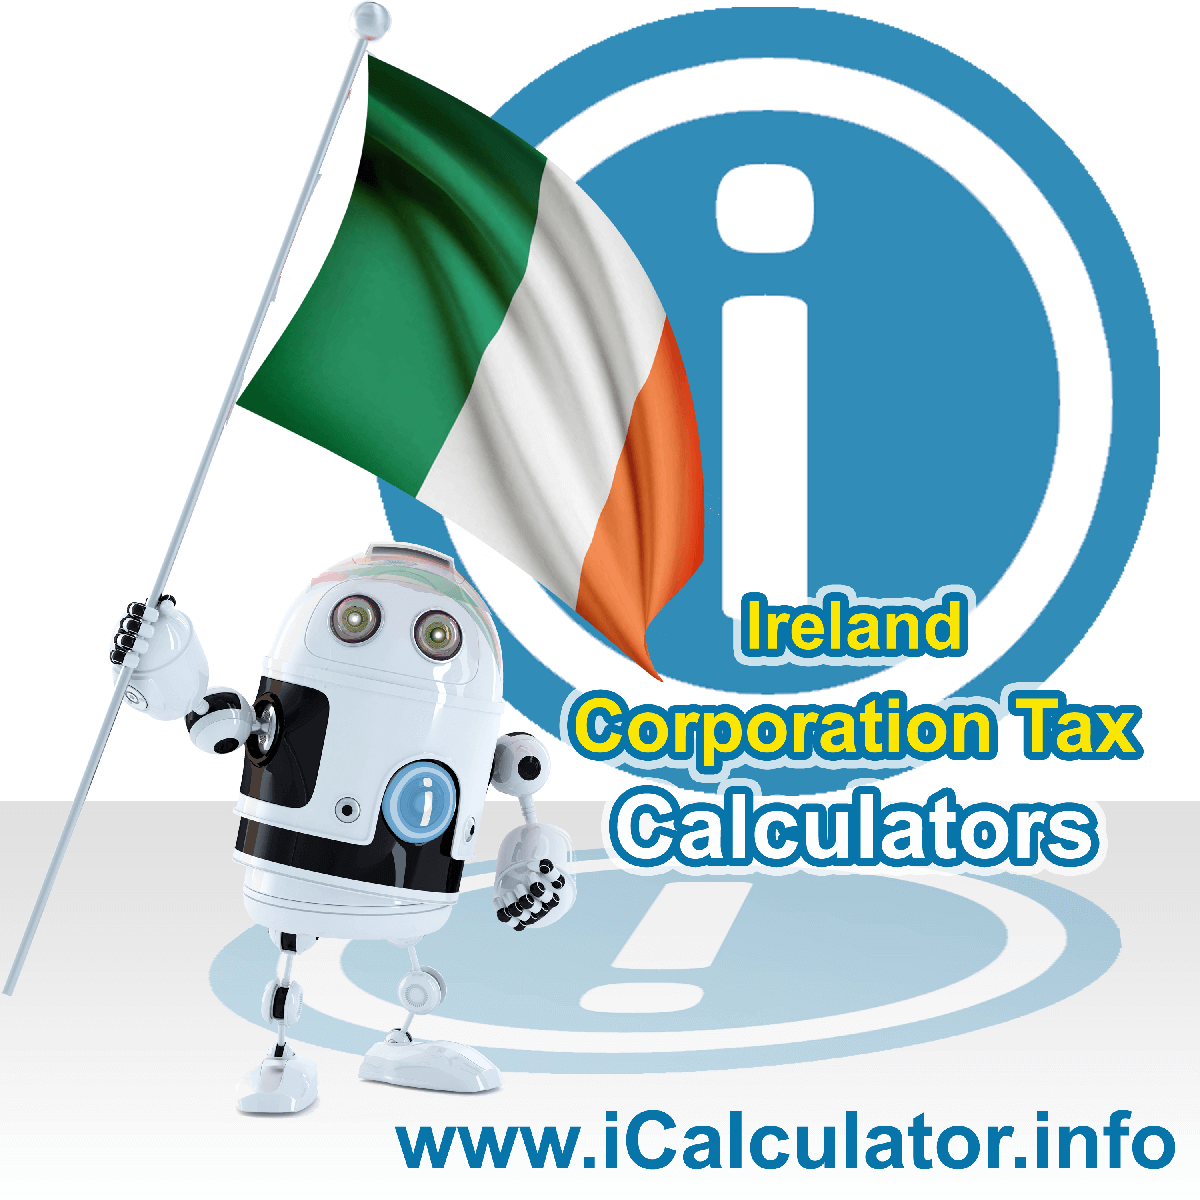 Ireland Corporation Tax Calculator. This image shows the Ireland flag and information relating to the corporation tax rate formula used for calculating Corporation Tax in Ireland using the Ireland Corporation Tax Calculator in 2023